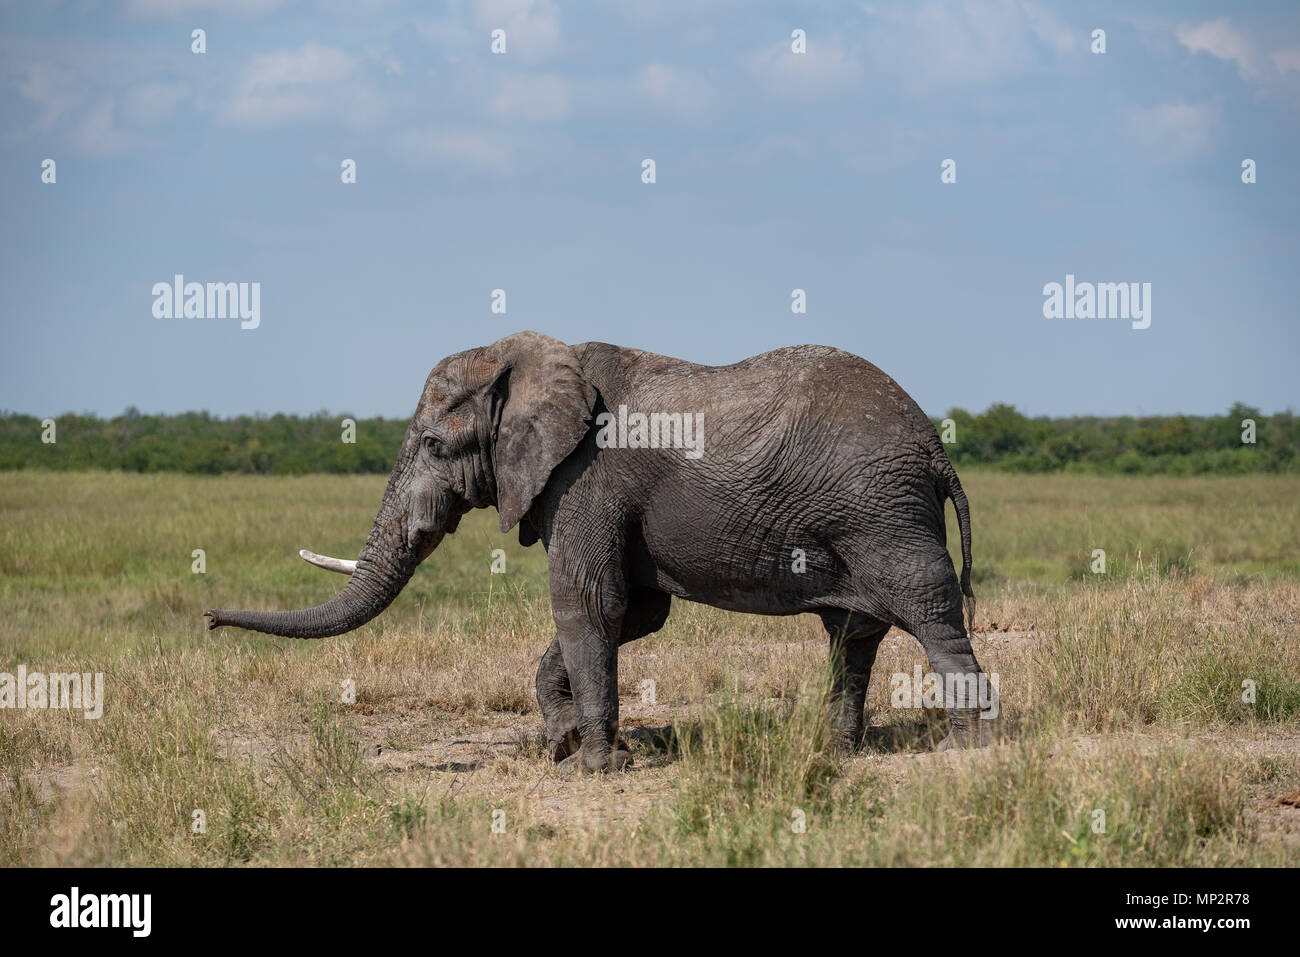 A large male elephant with just one tusk walking through grassland Stock Photo